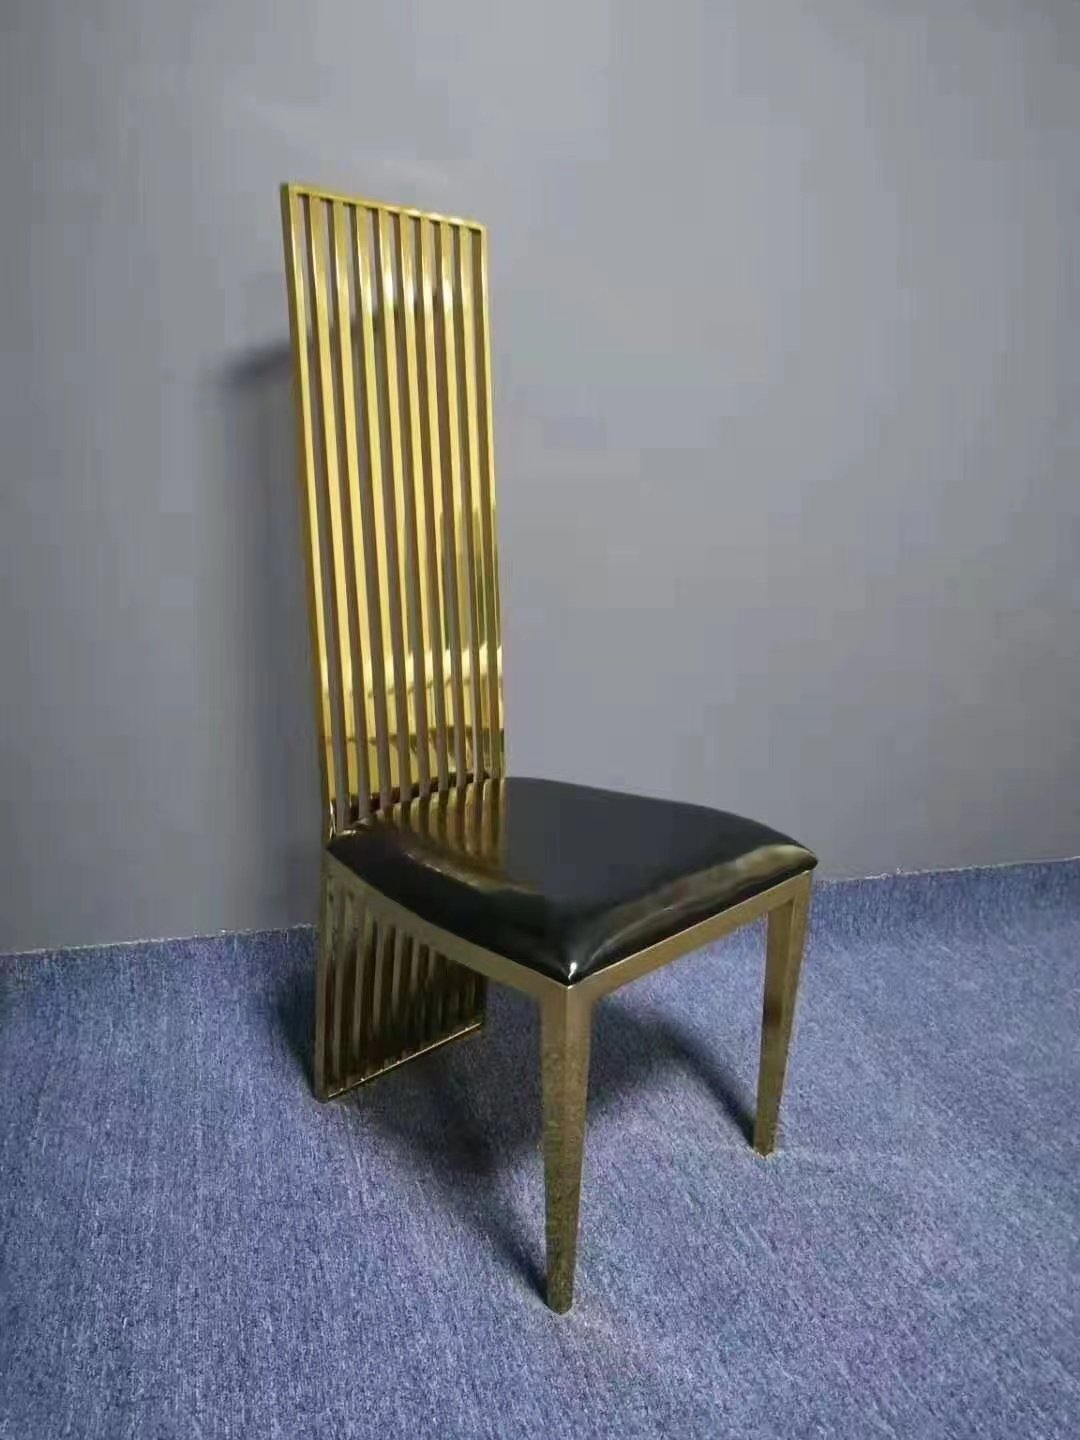 event chair